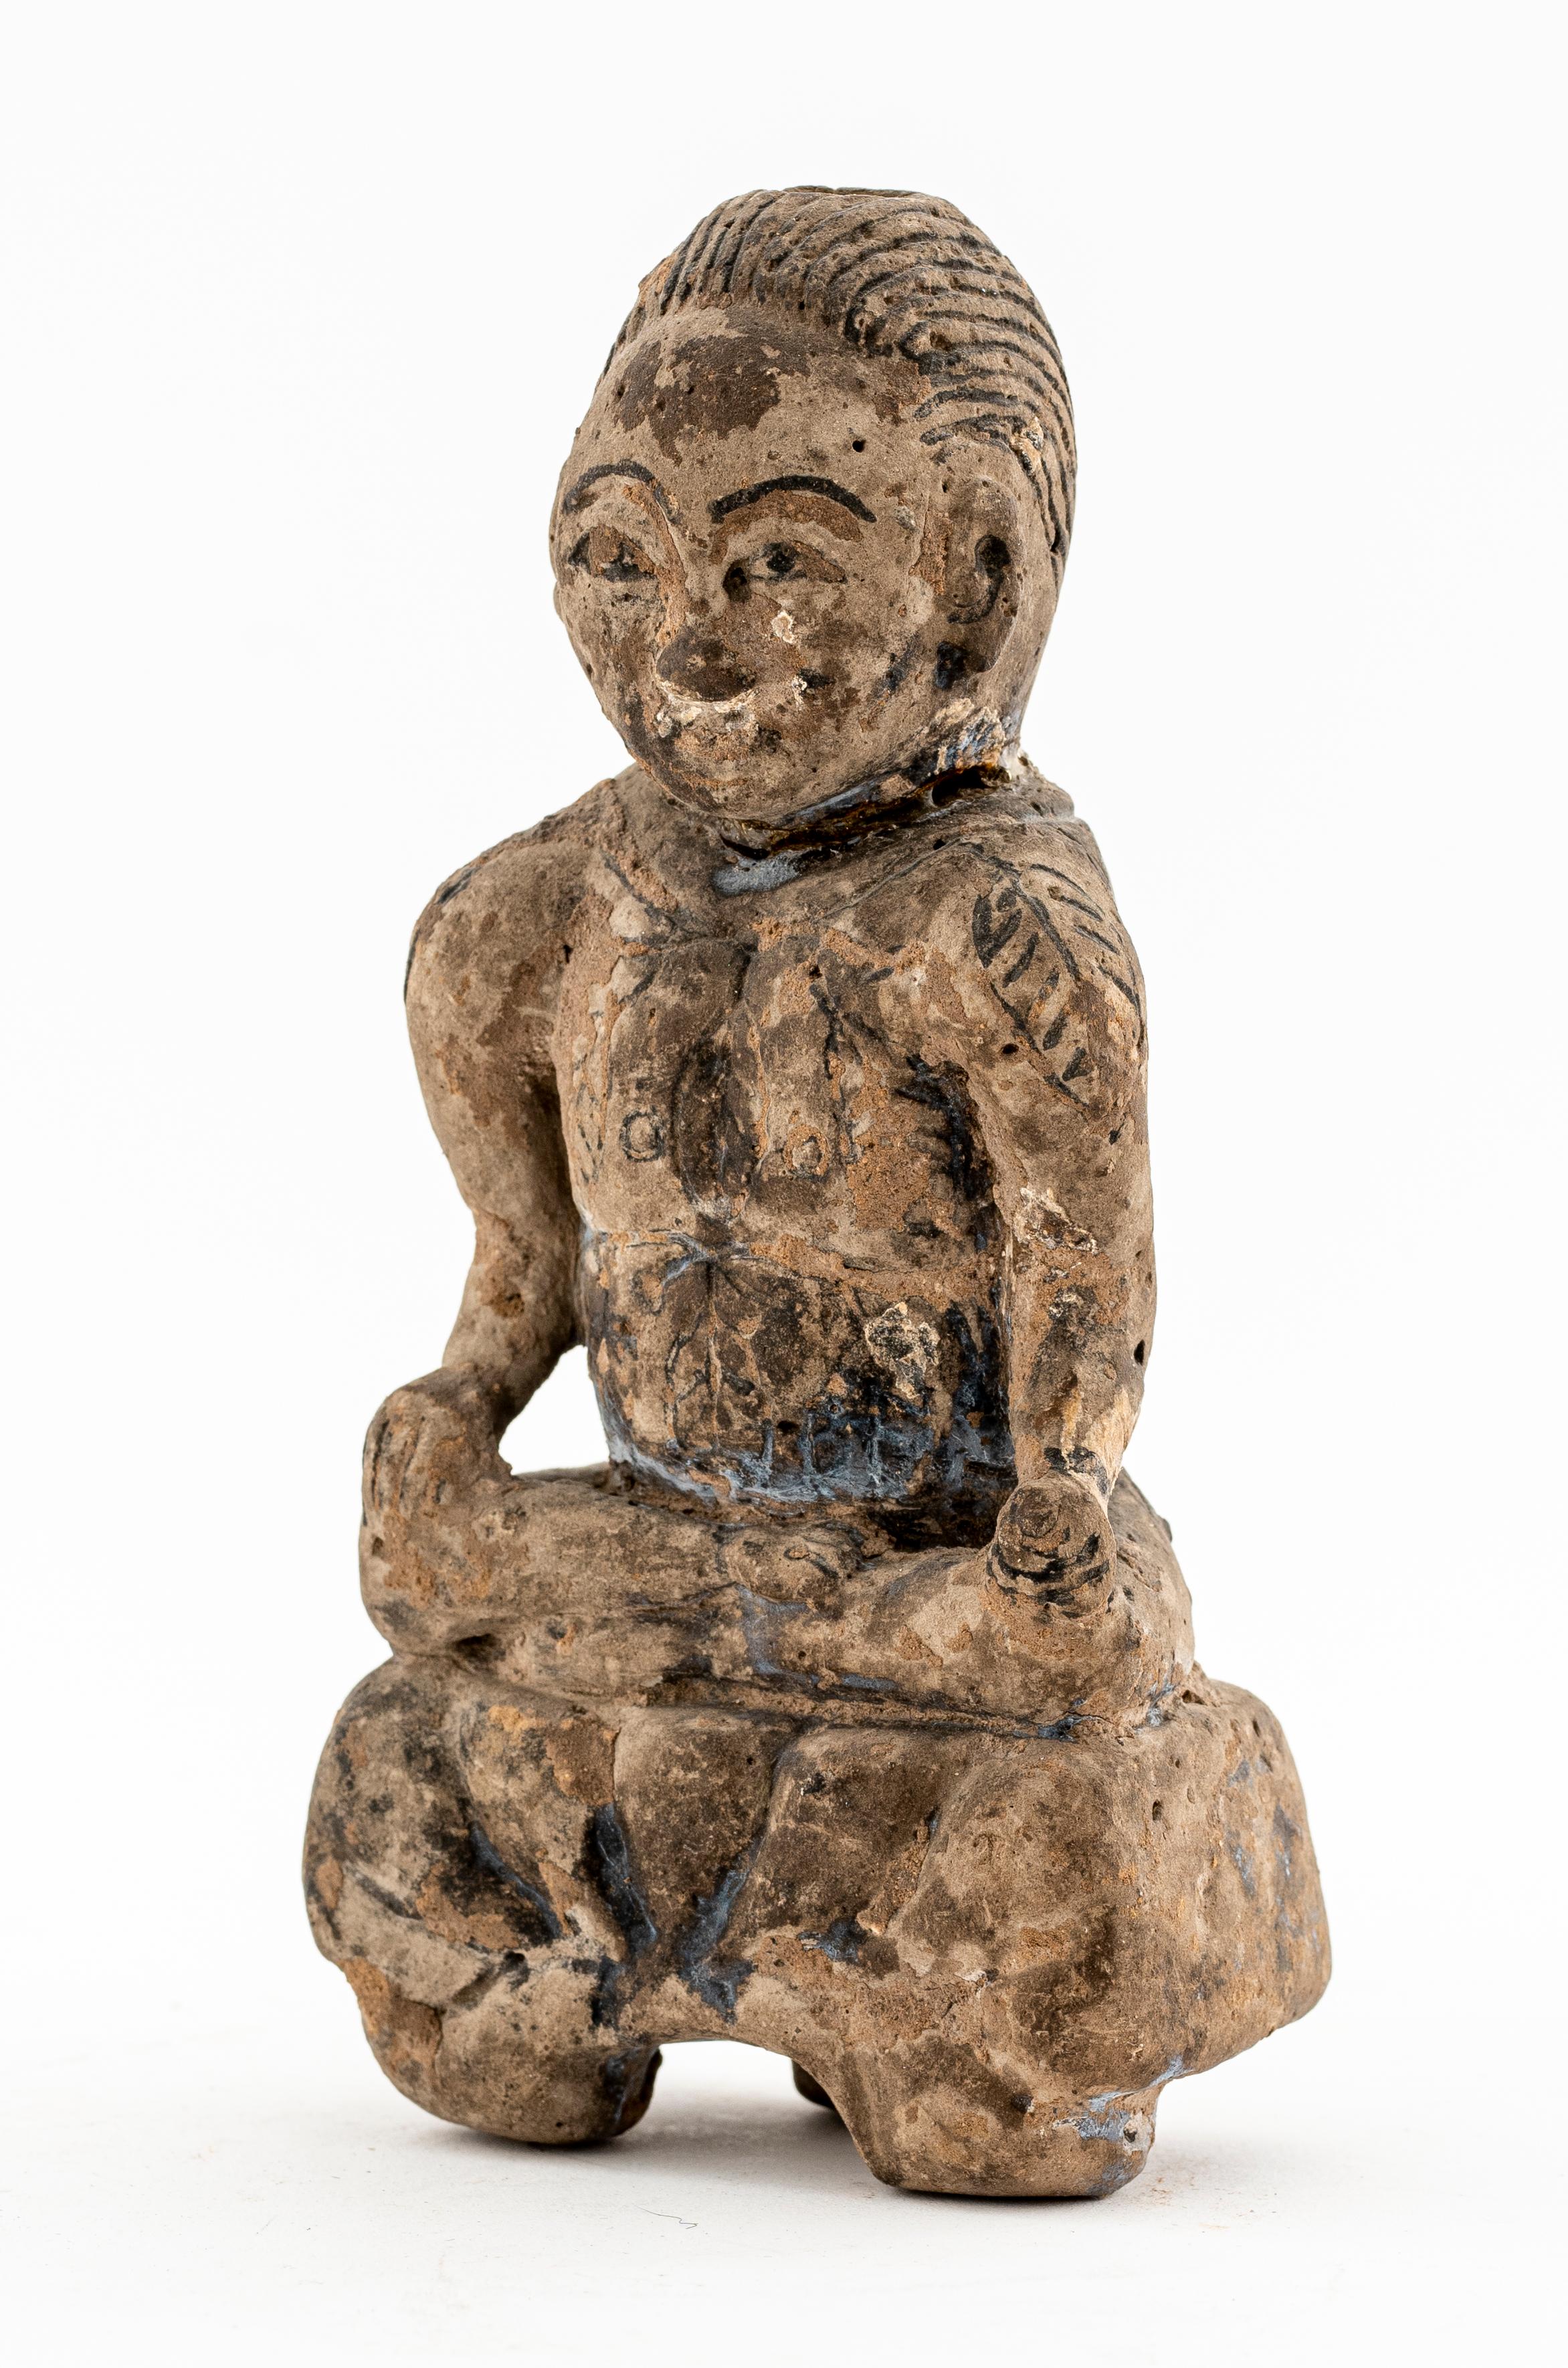 Indian subcontinental terra cotta in the form of a man seated on a tri-footed table- form base and resting his hands on his knees, a rope of leaves slung around his shoulder.